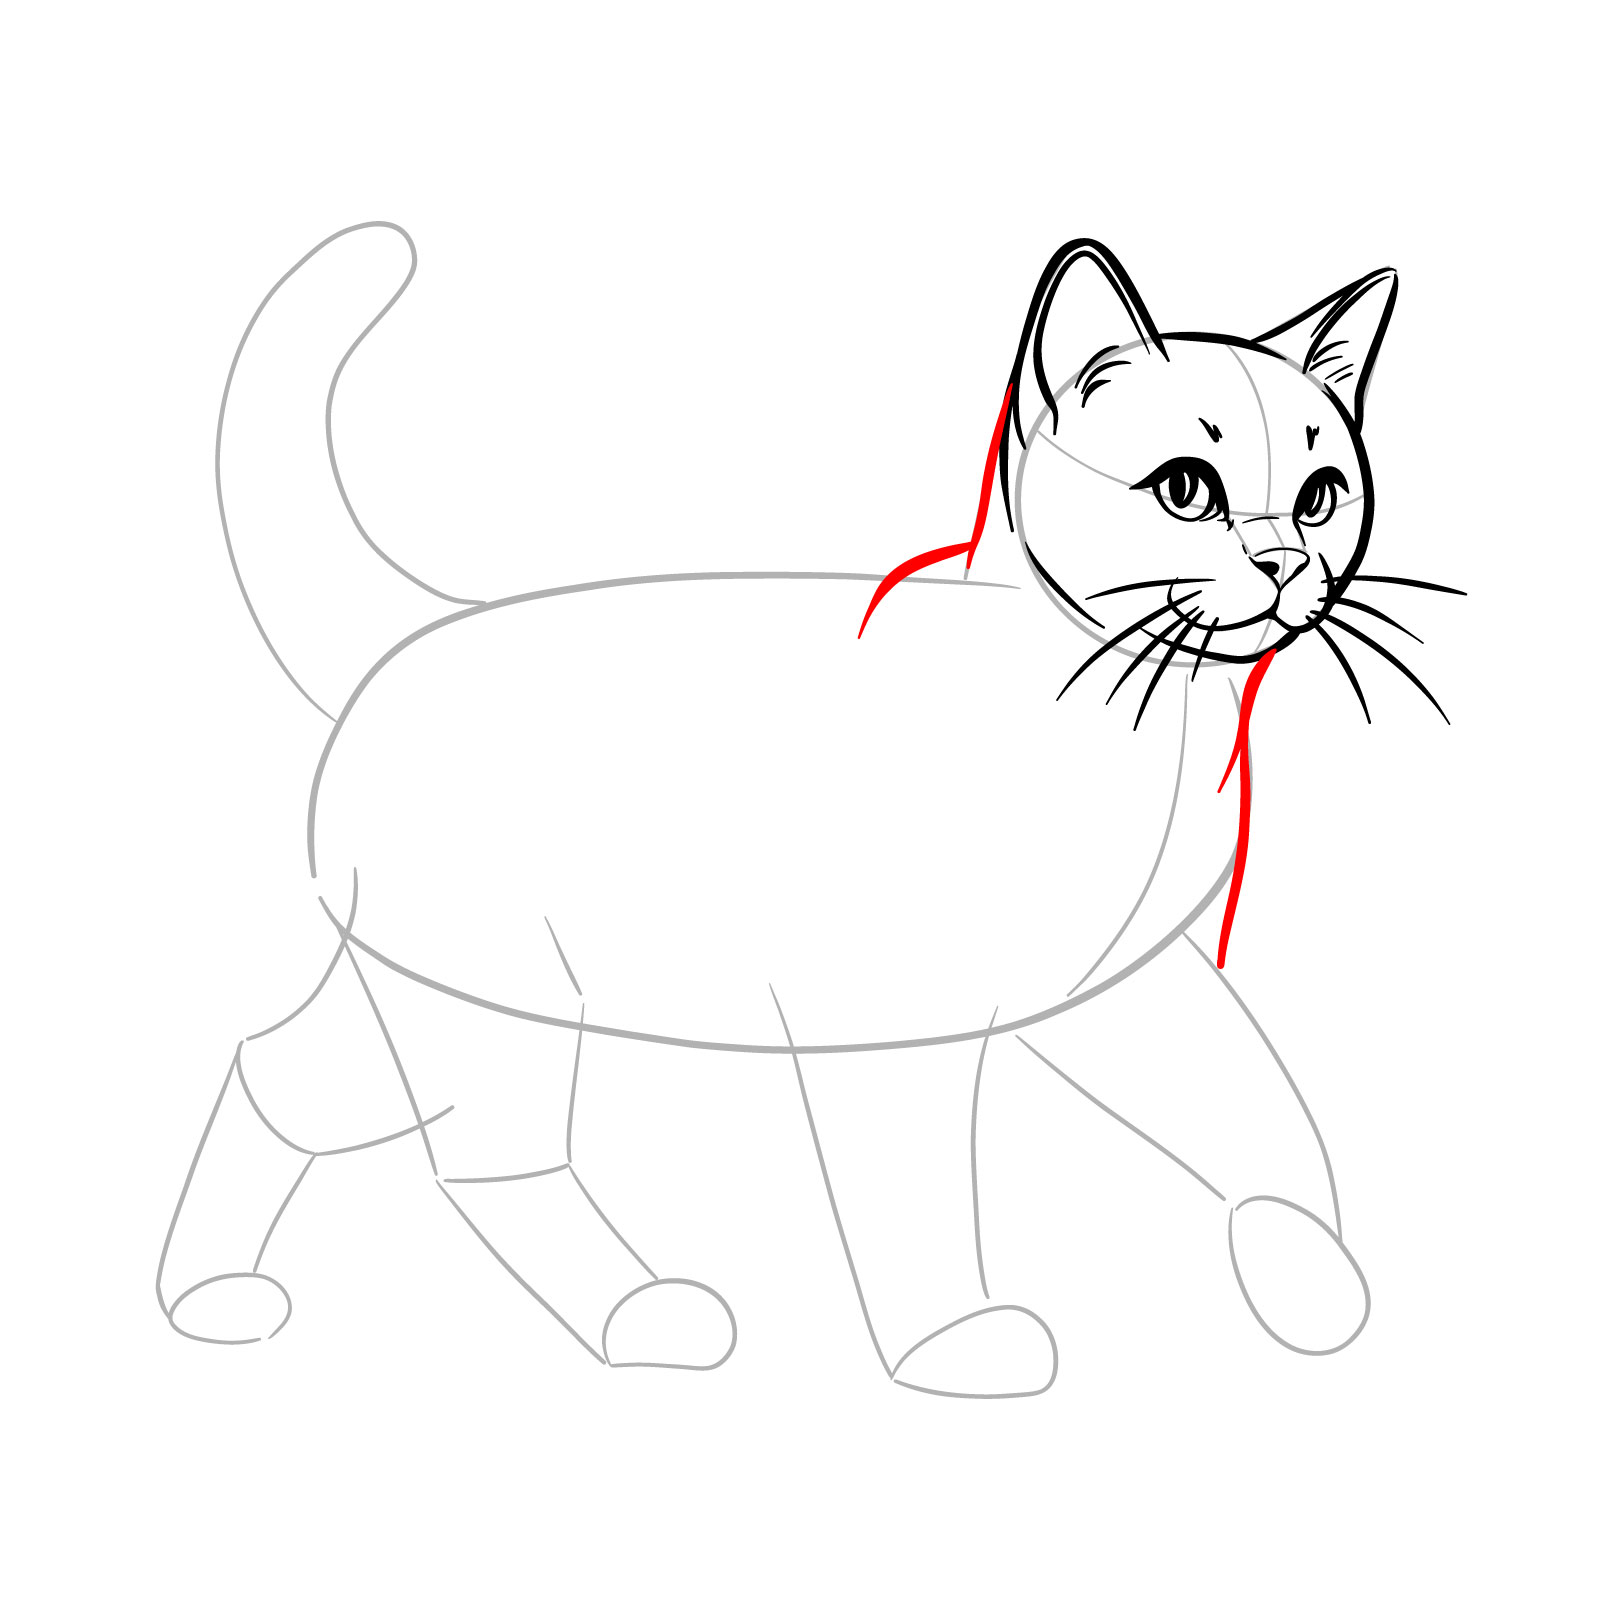 Outlining the neck and upper body of the cat to illustrate a walking motion - step 08